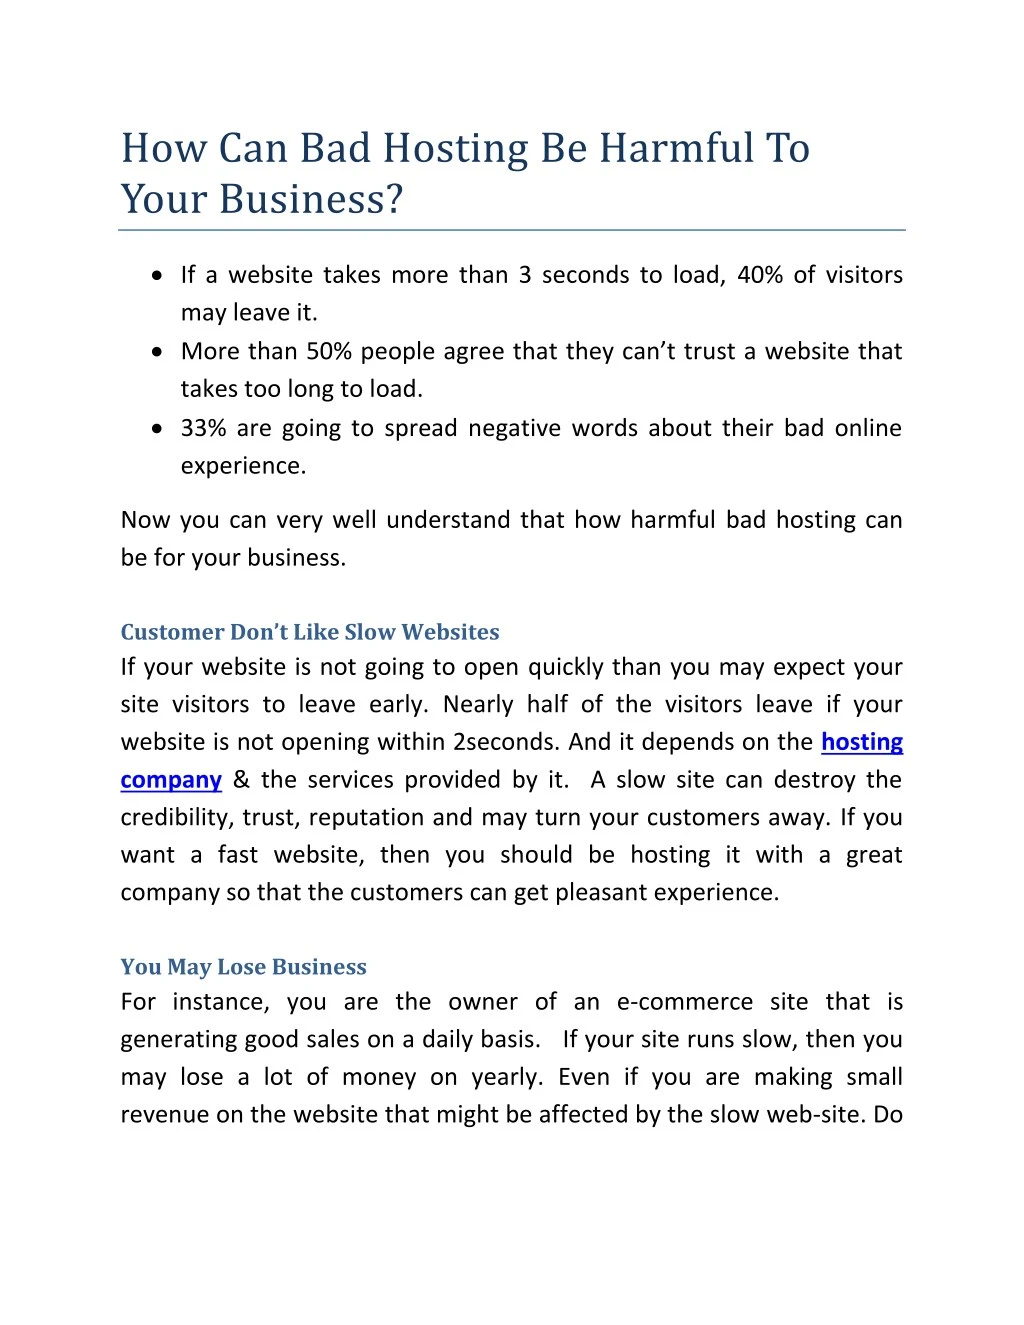 how can bad hosting be harmful to your business